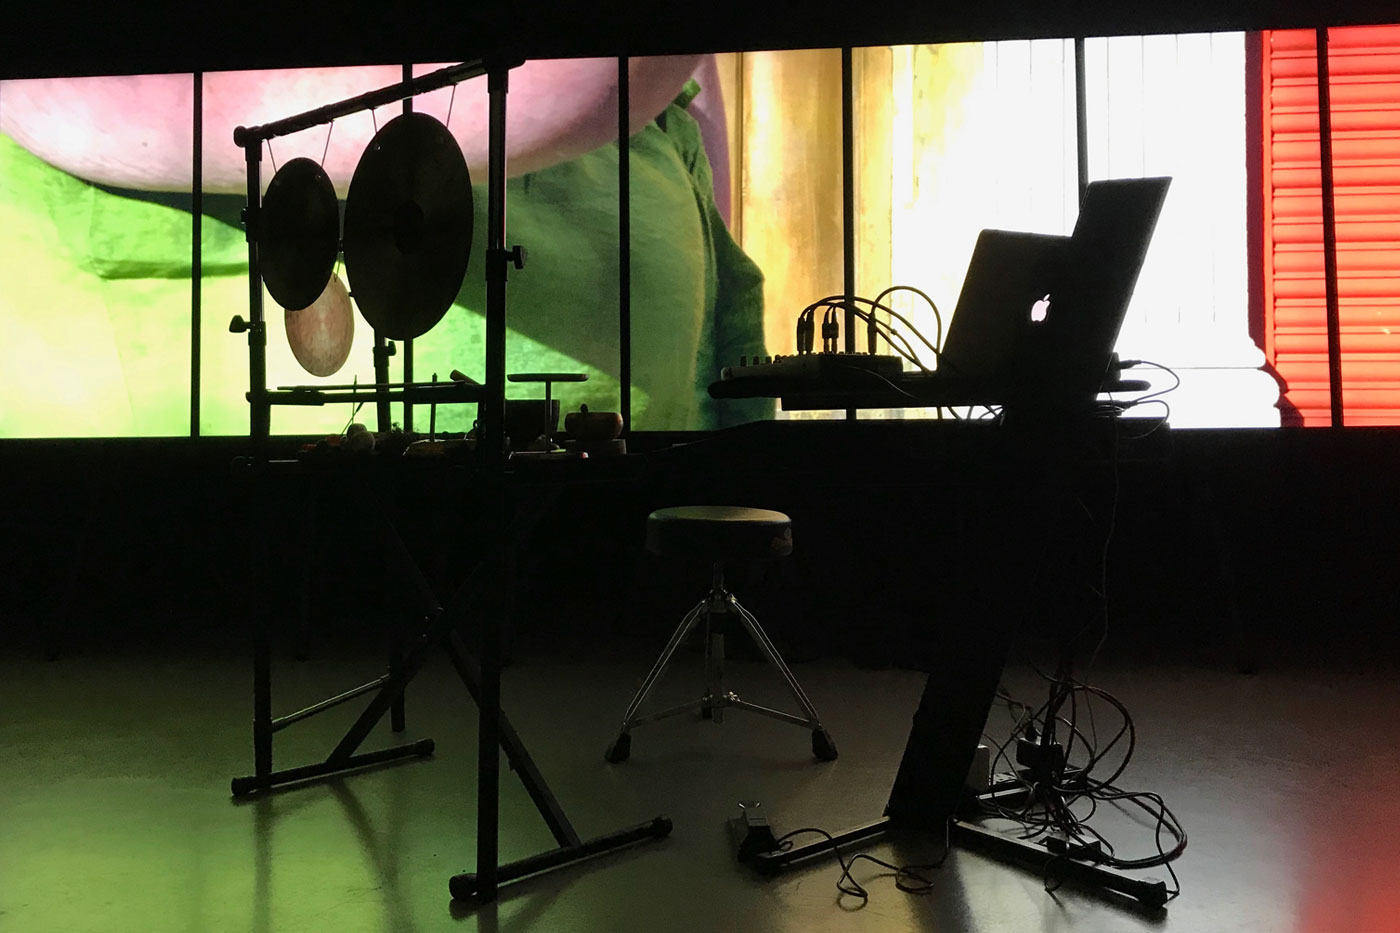 David Donohoe, live at the RHA, 17 March 2019